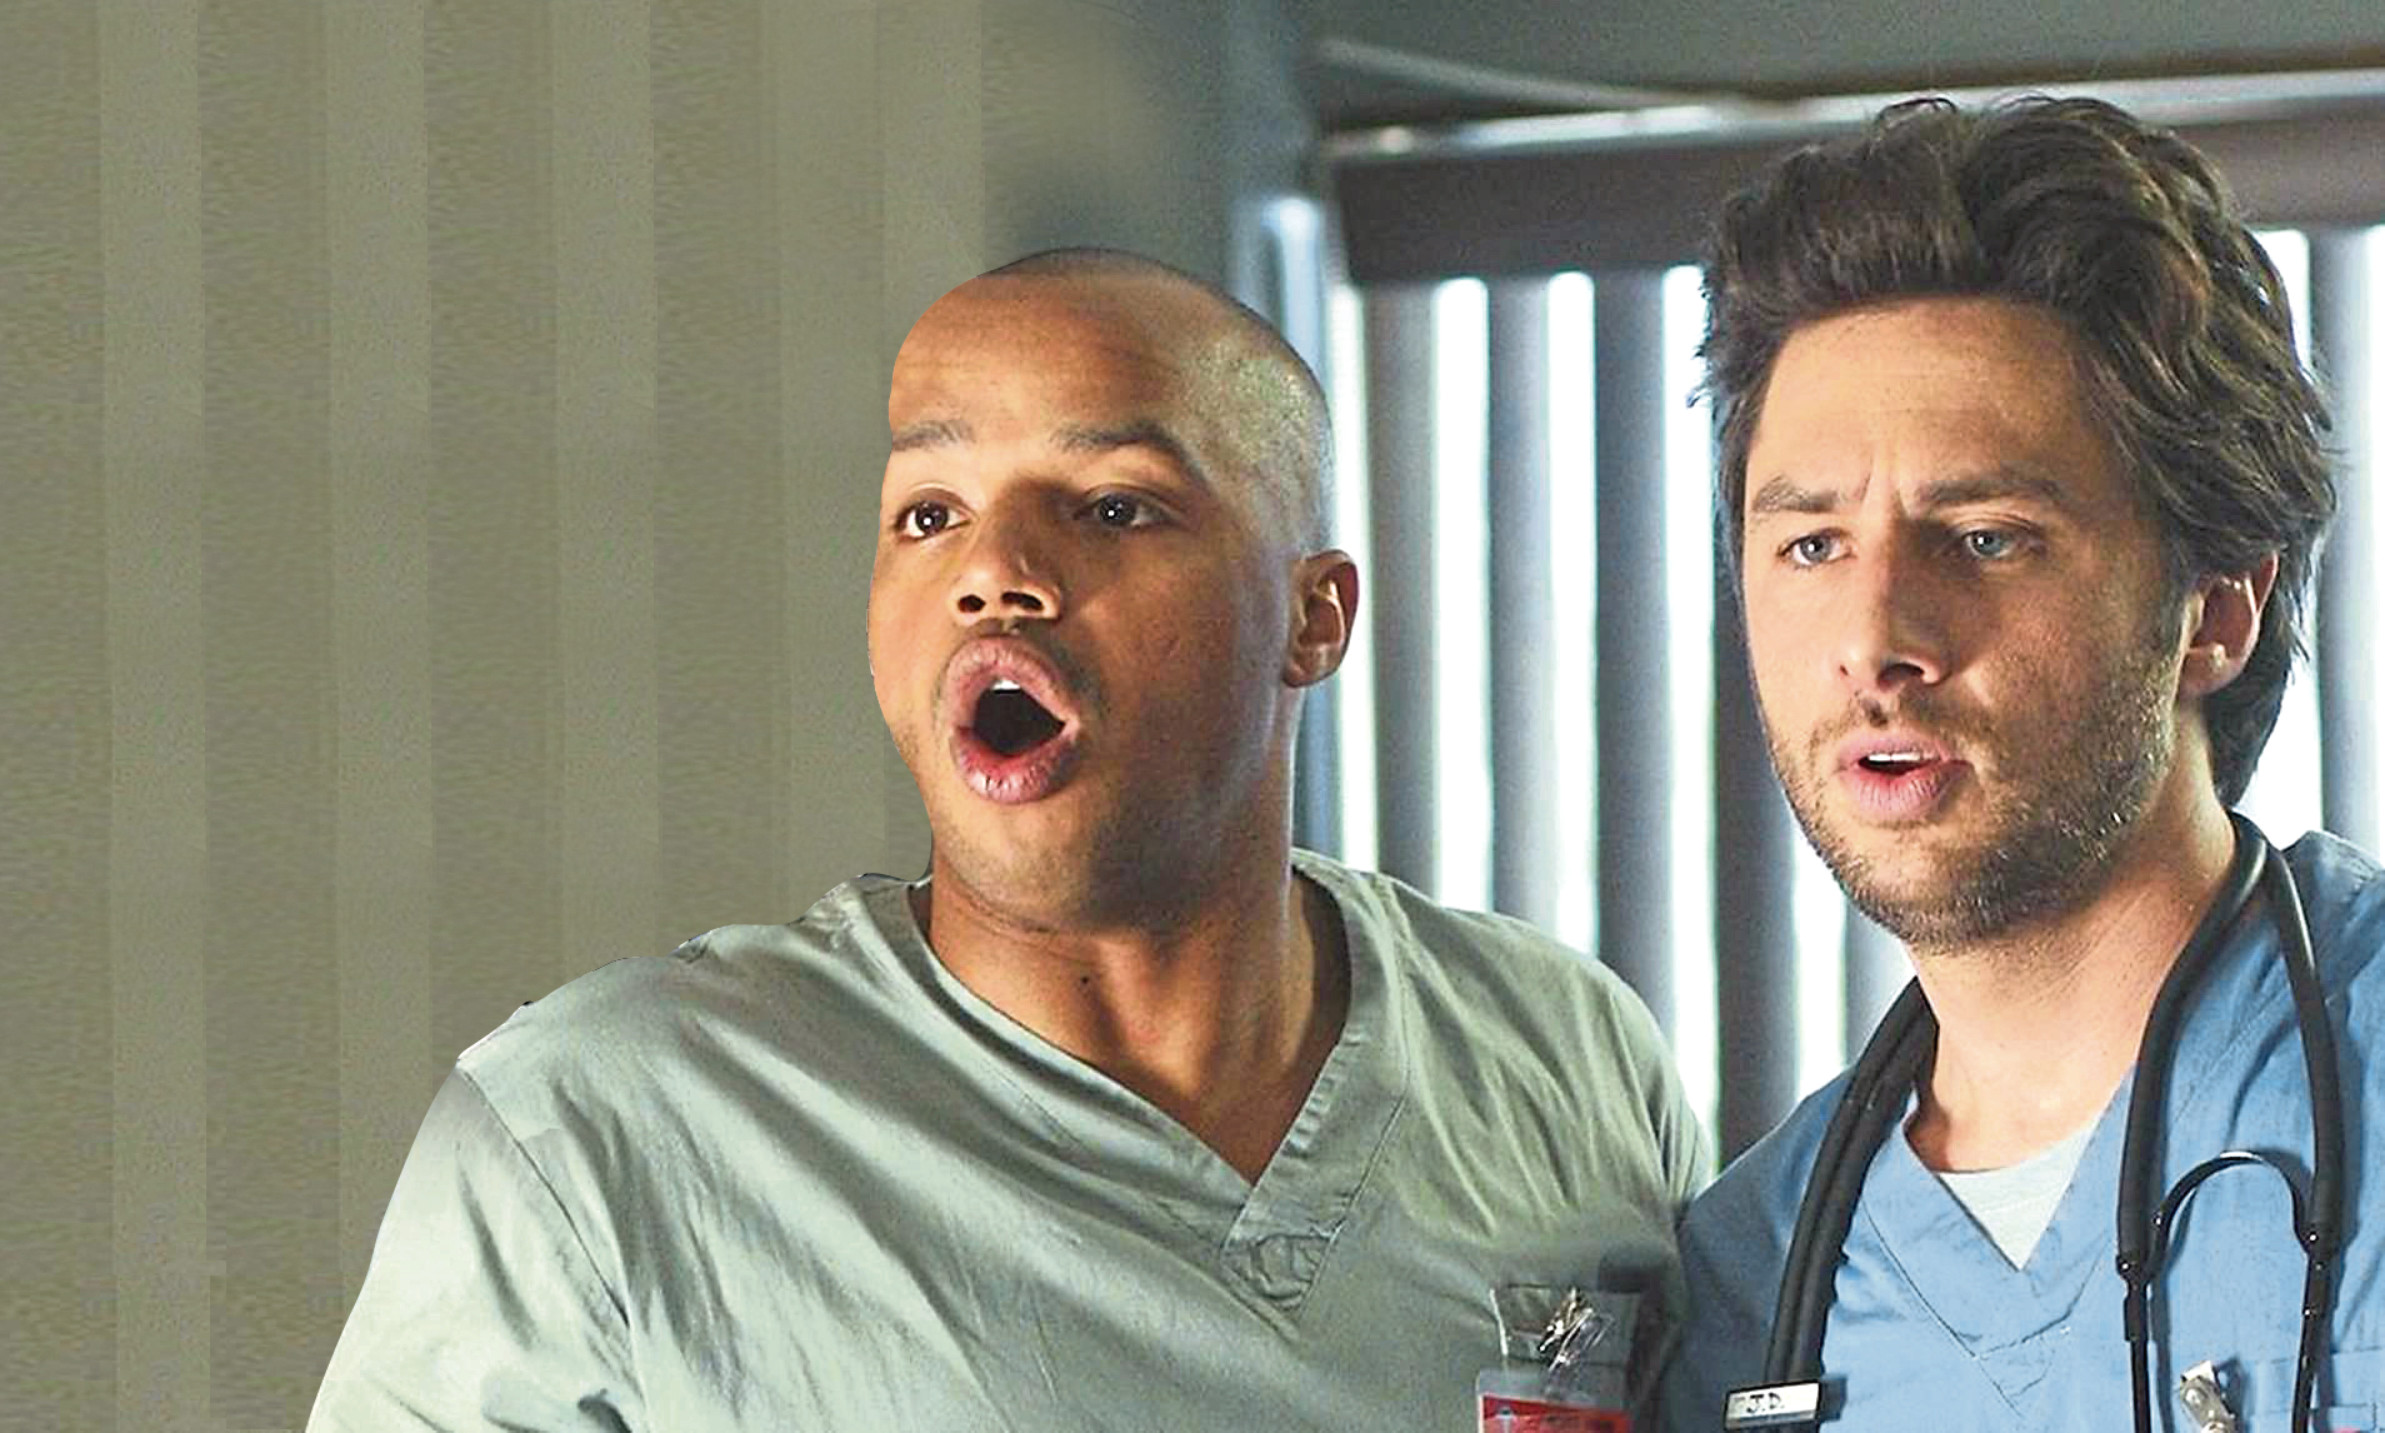 Donald Faison and Zach Braff in noughties medical sitcom Scrubs